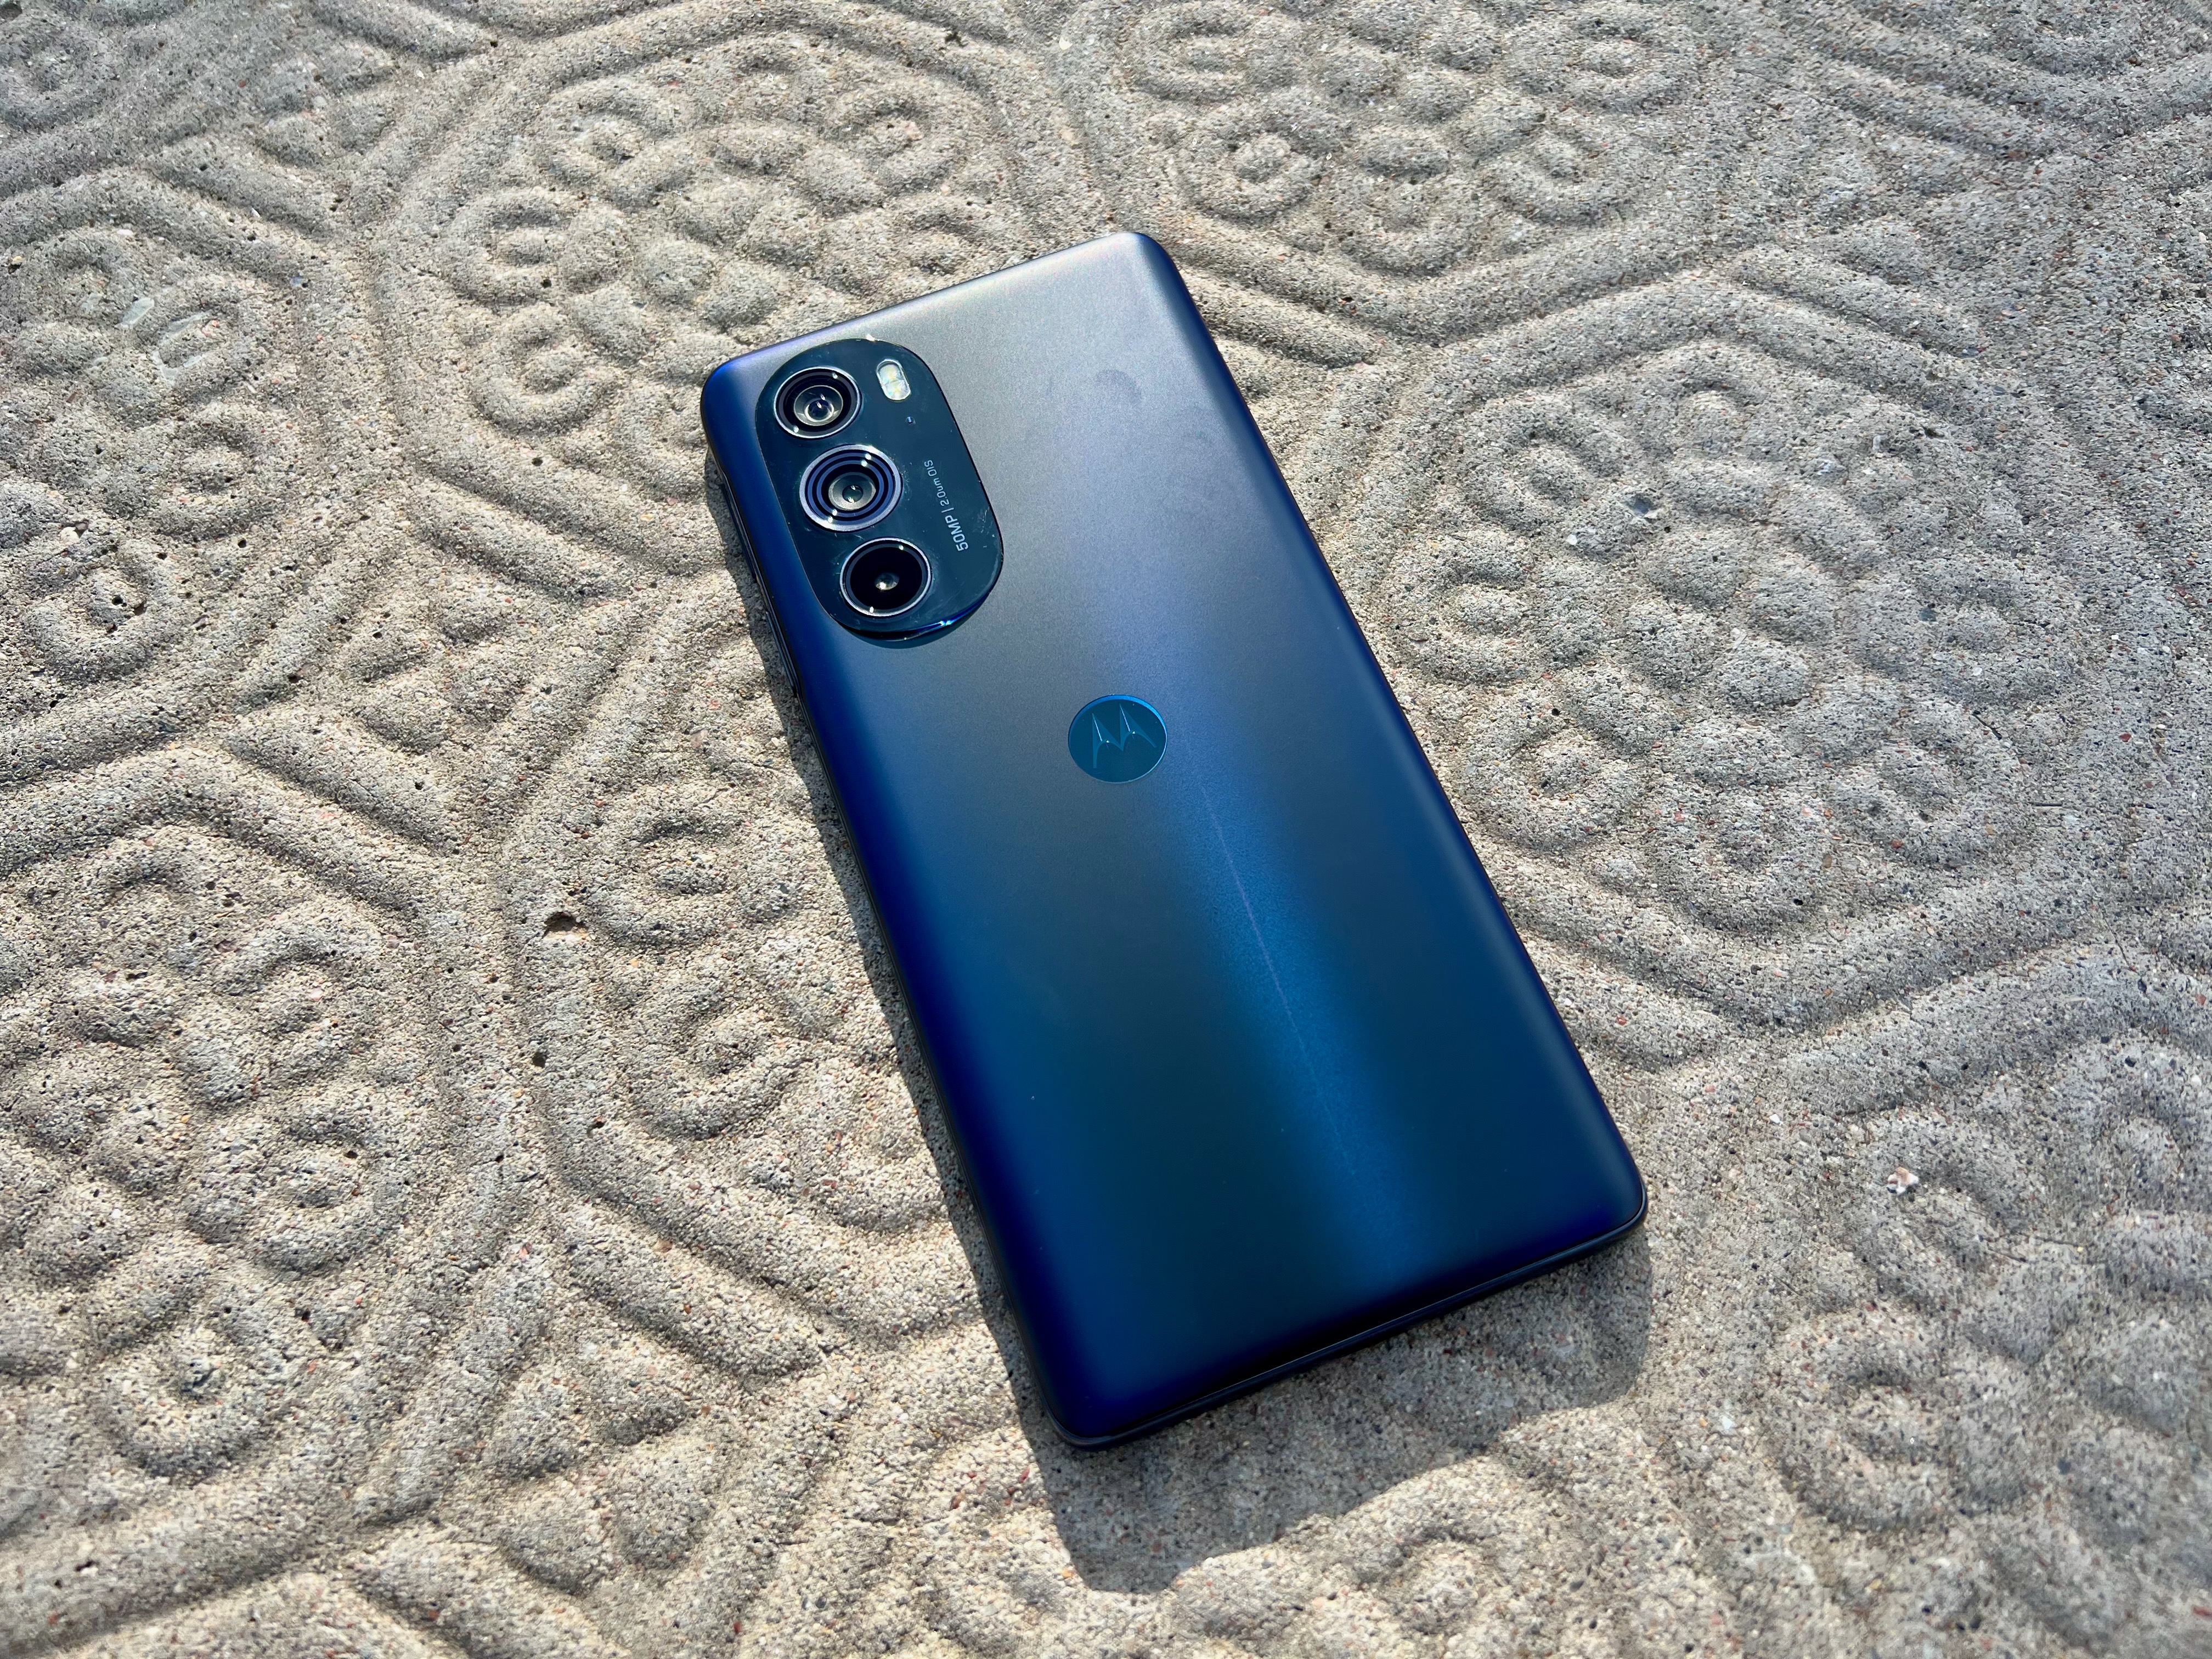 Motorola Moto Edge 30 Pro review: is it really a flagship?